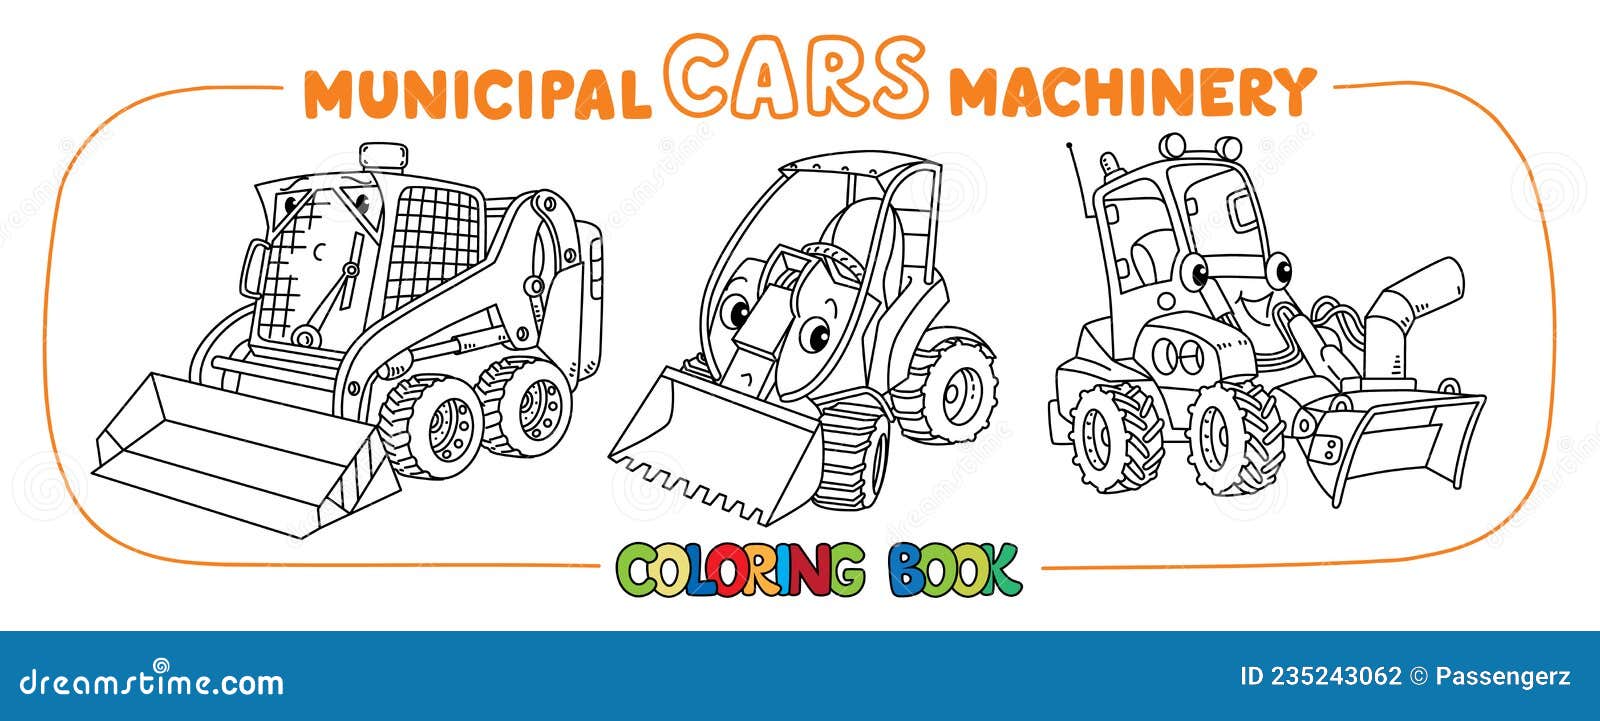 funny municipal cars with eyes coloring book set